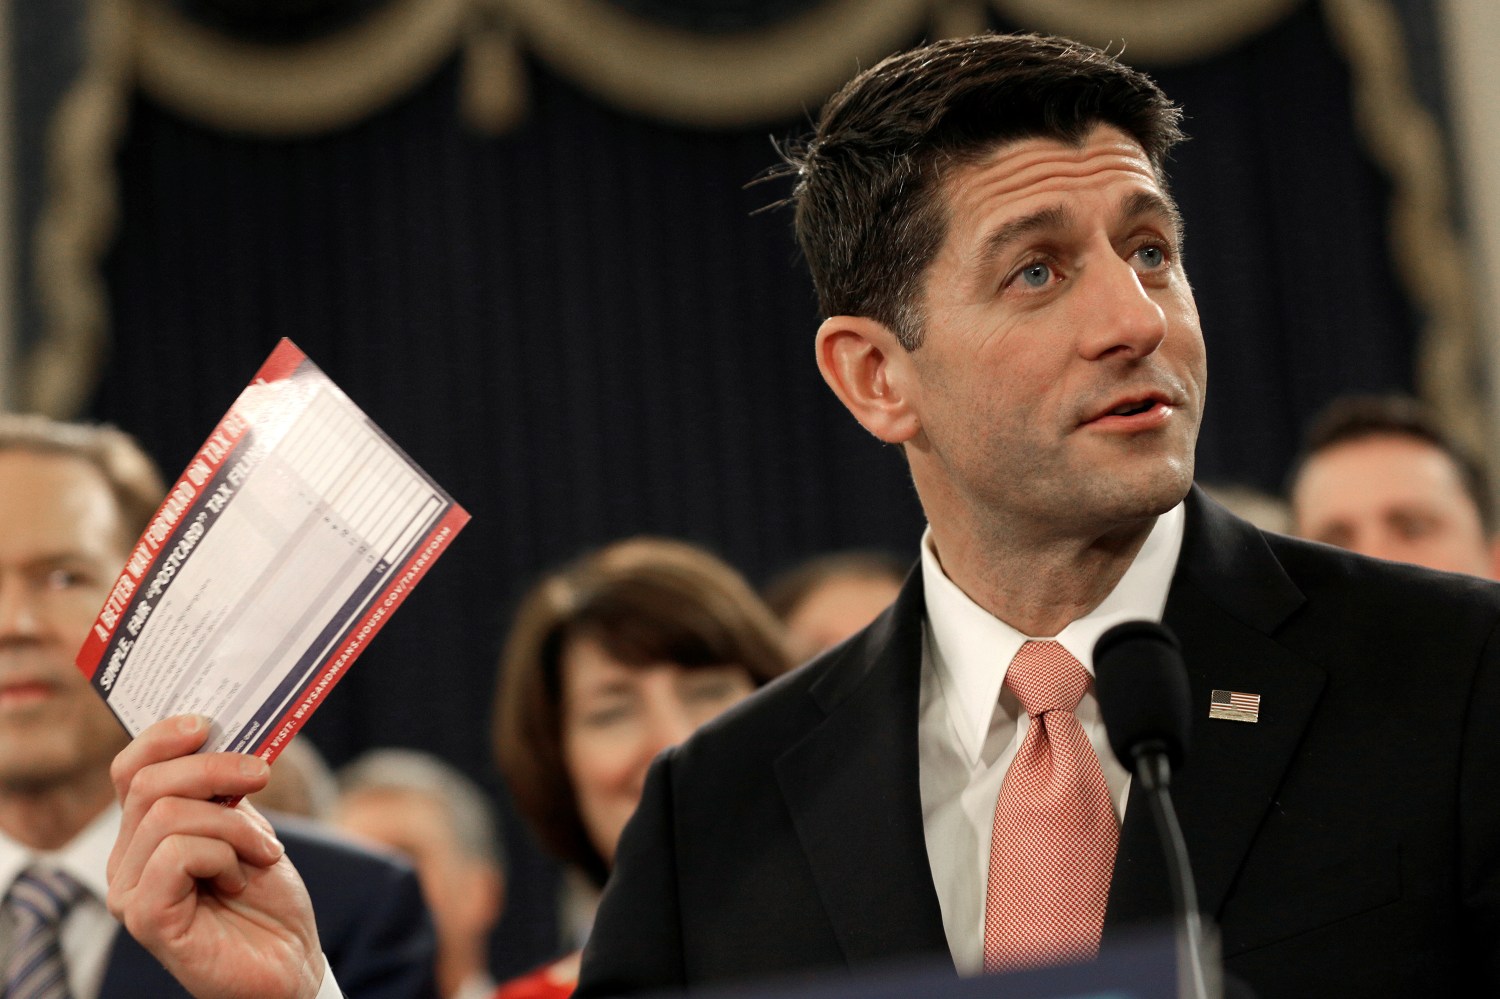 Speaker of the House Paul Ryan (R-WI) holds a sample tax form as he unveils legislation to overhaul the tax code.